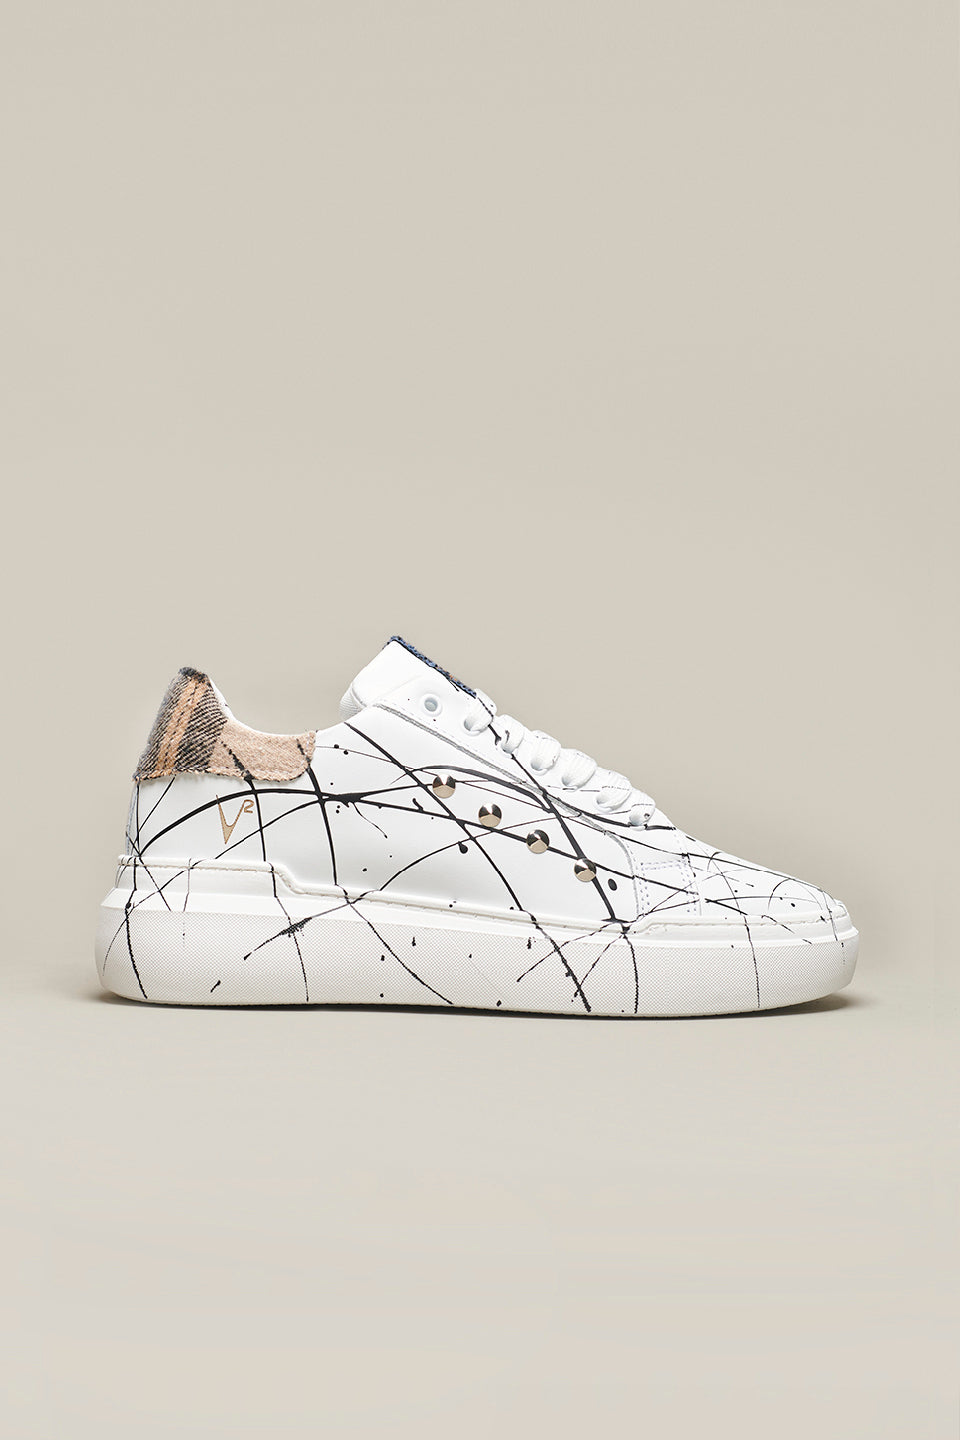 VEGA - Retro high sole sneakers in Scottish Sand fabric with studs and paint splashes